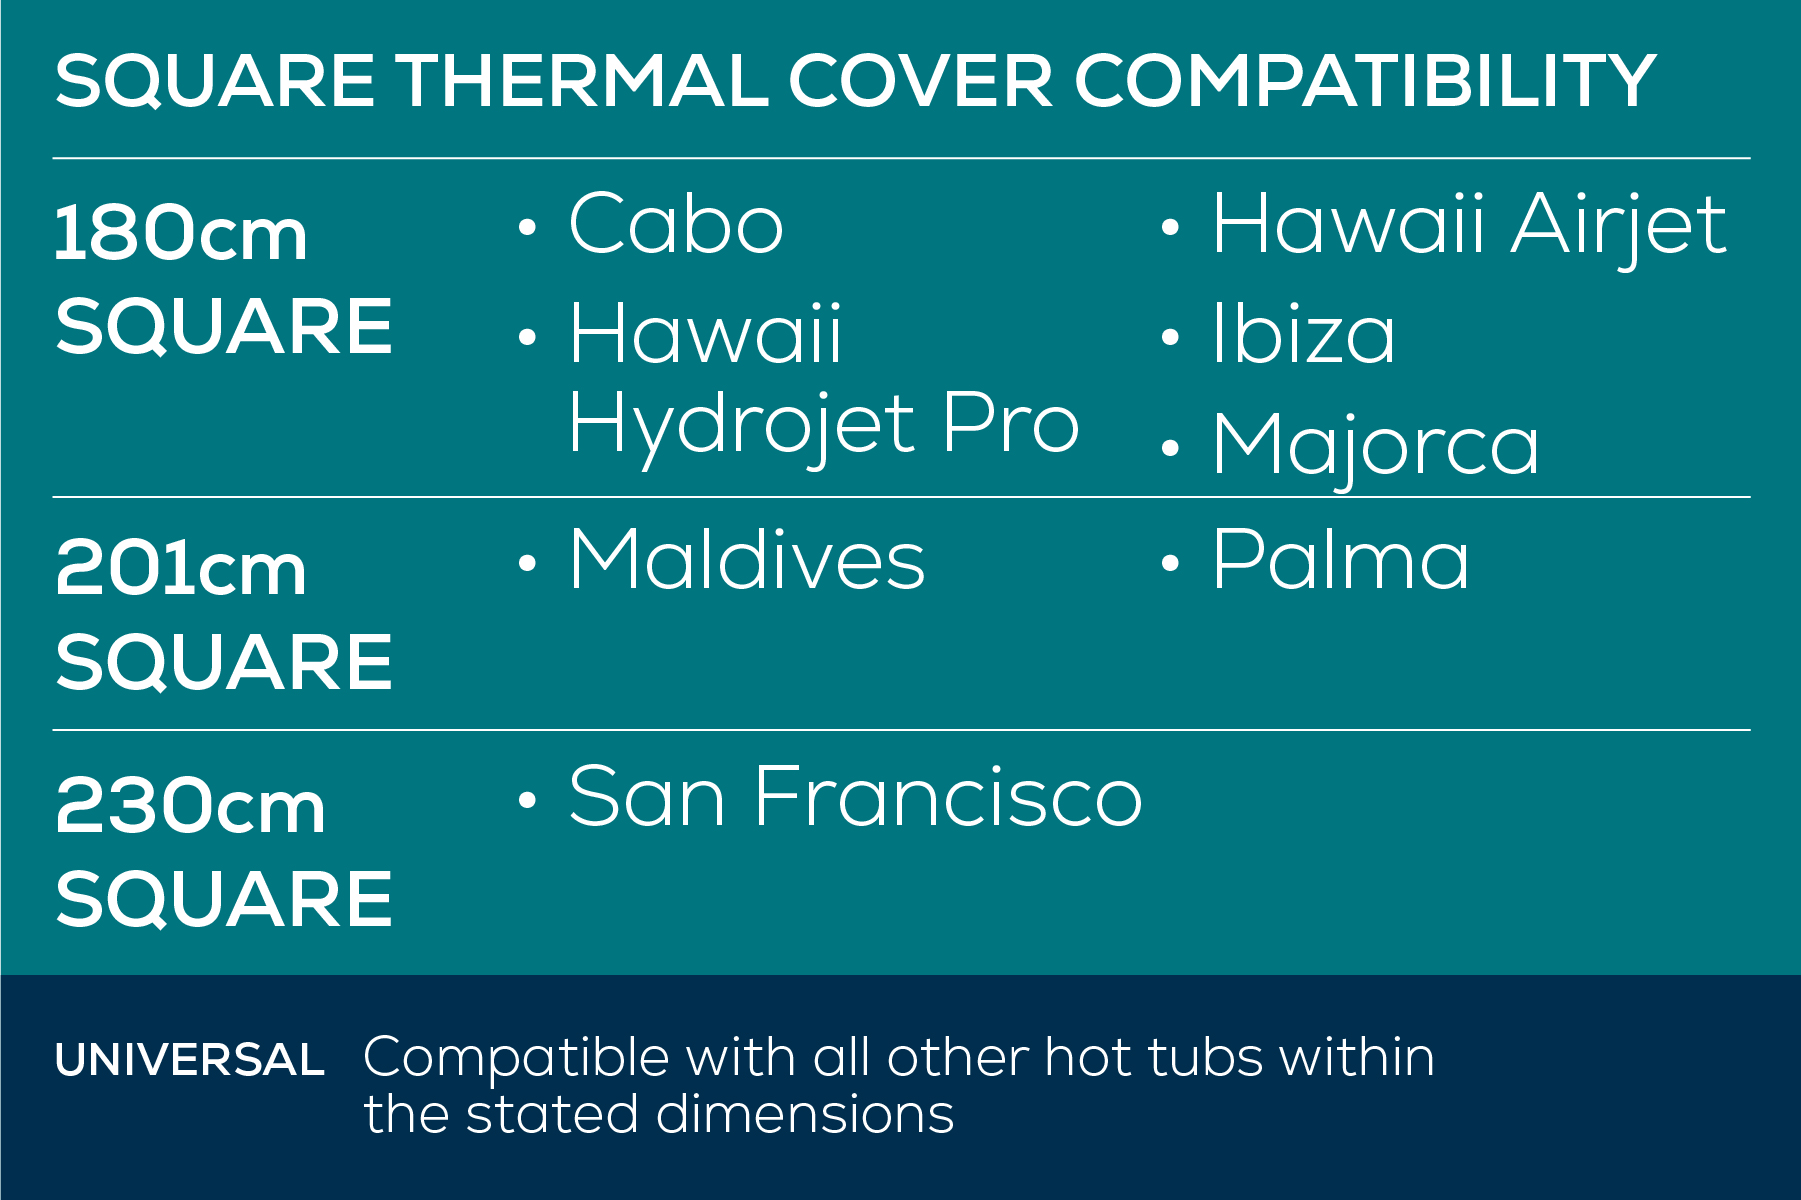 Square thermal hot tub covers